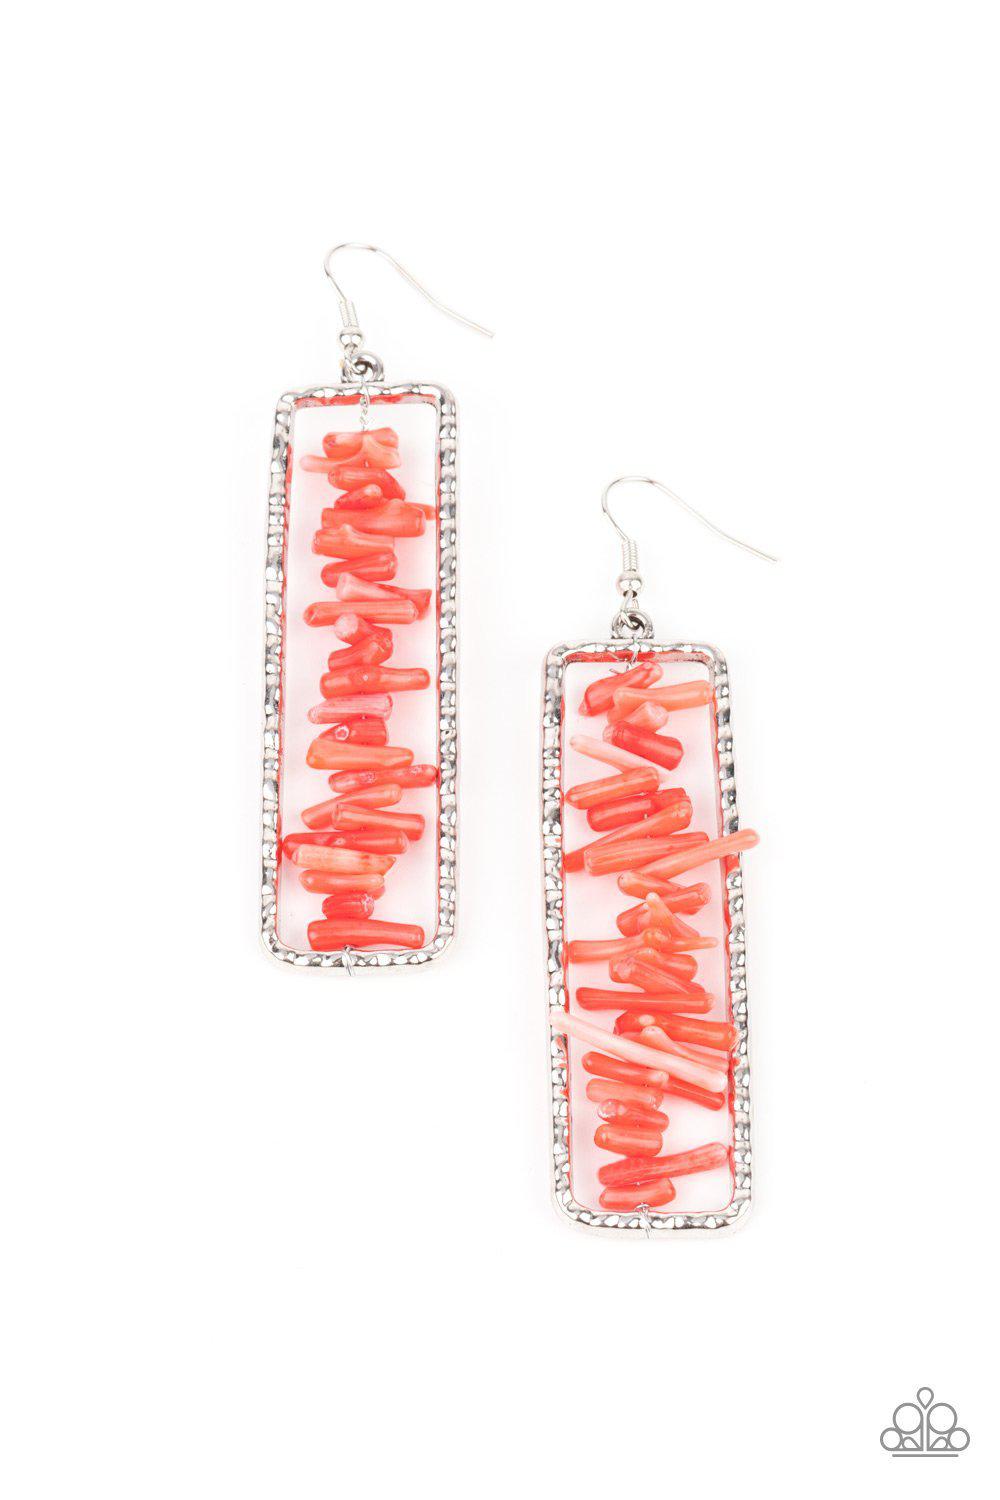 Don't QUARRY, Be Happy Red Earrings - Paparazzi Accessories- lightbox - CarasShop.com - $5 Jewelry by Cara Jewels